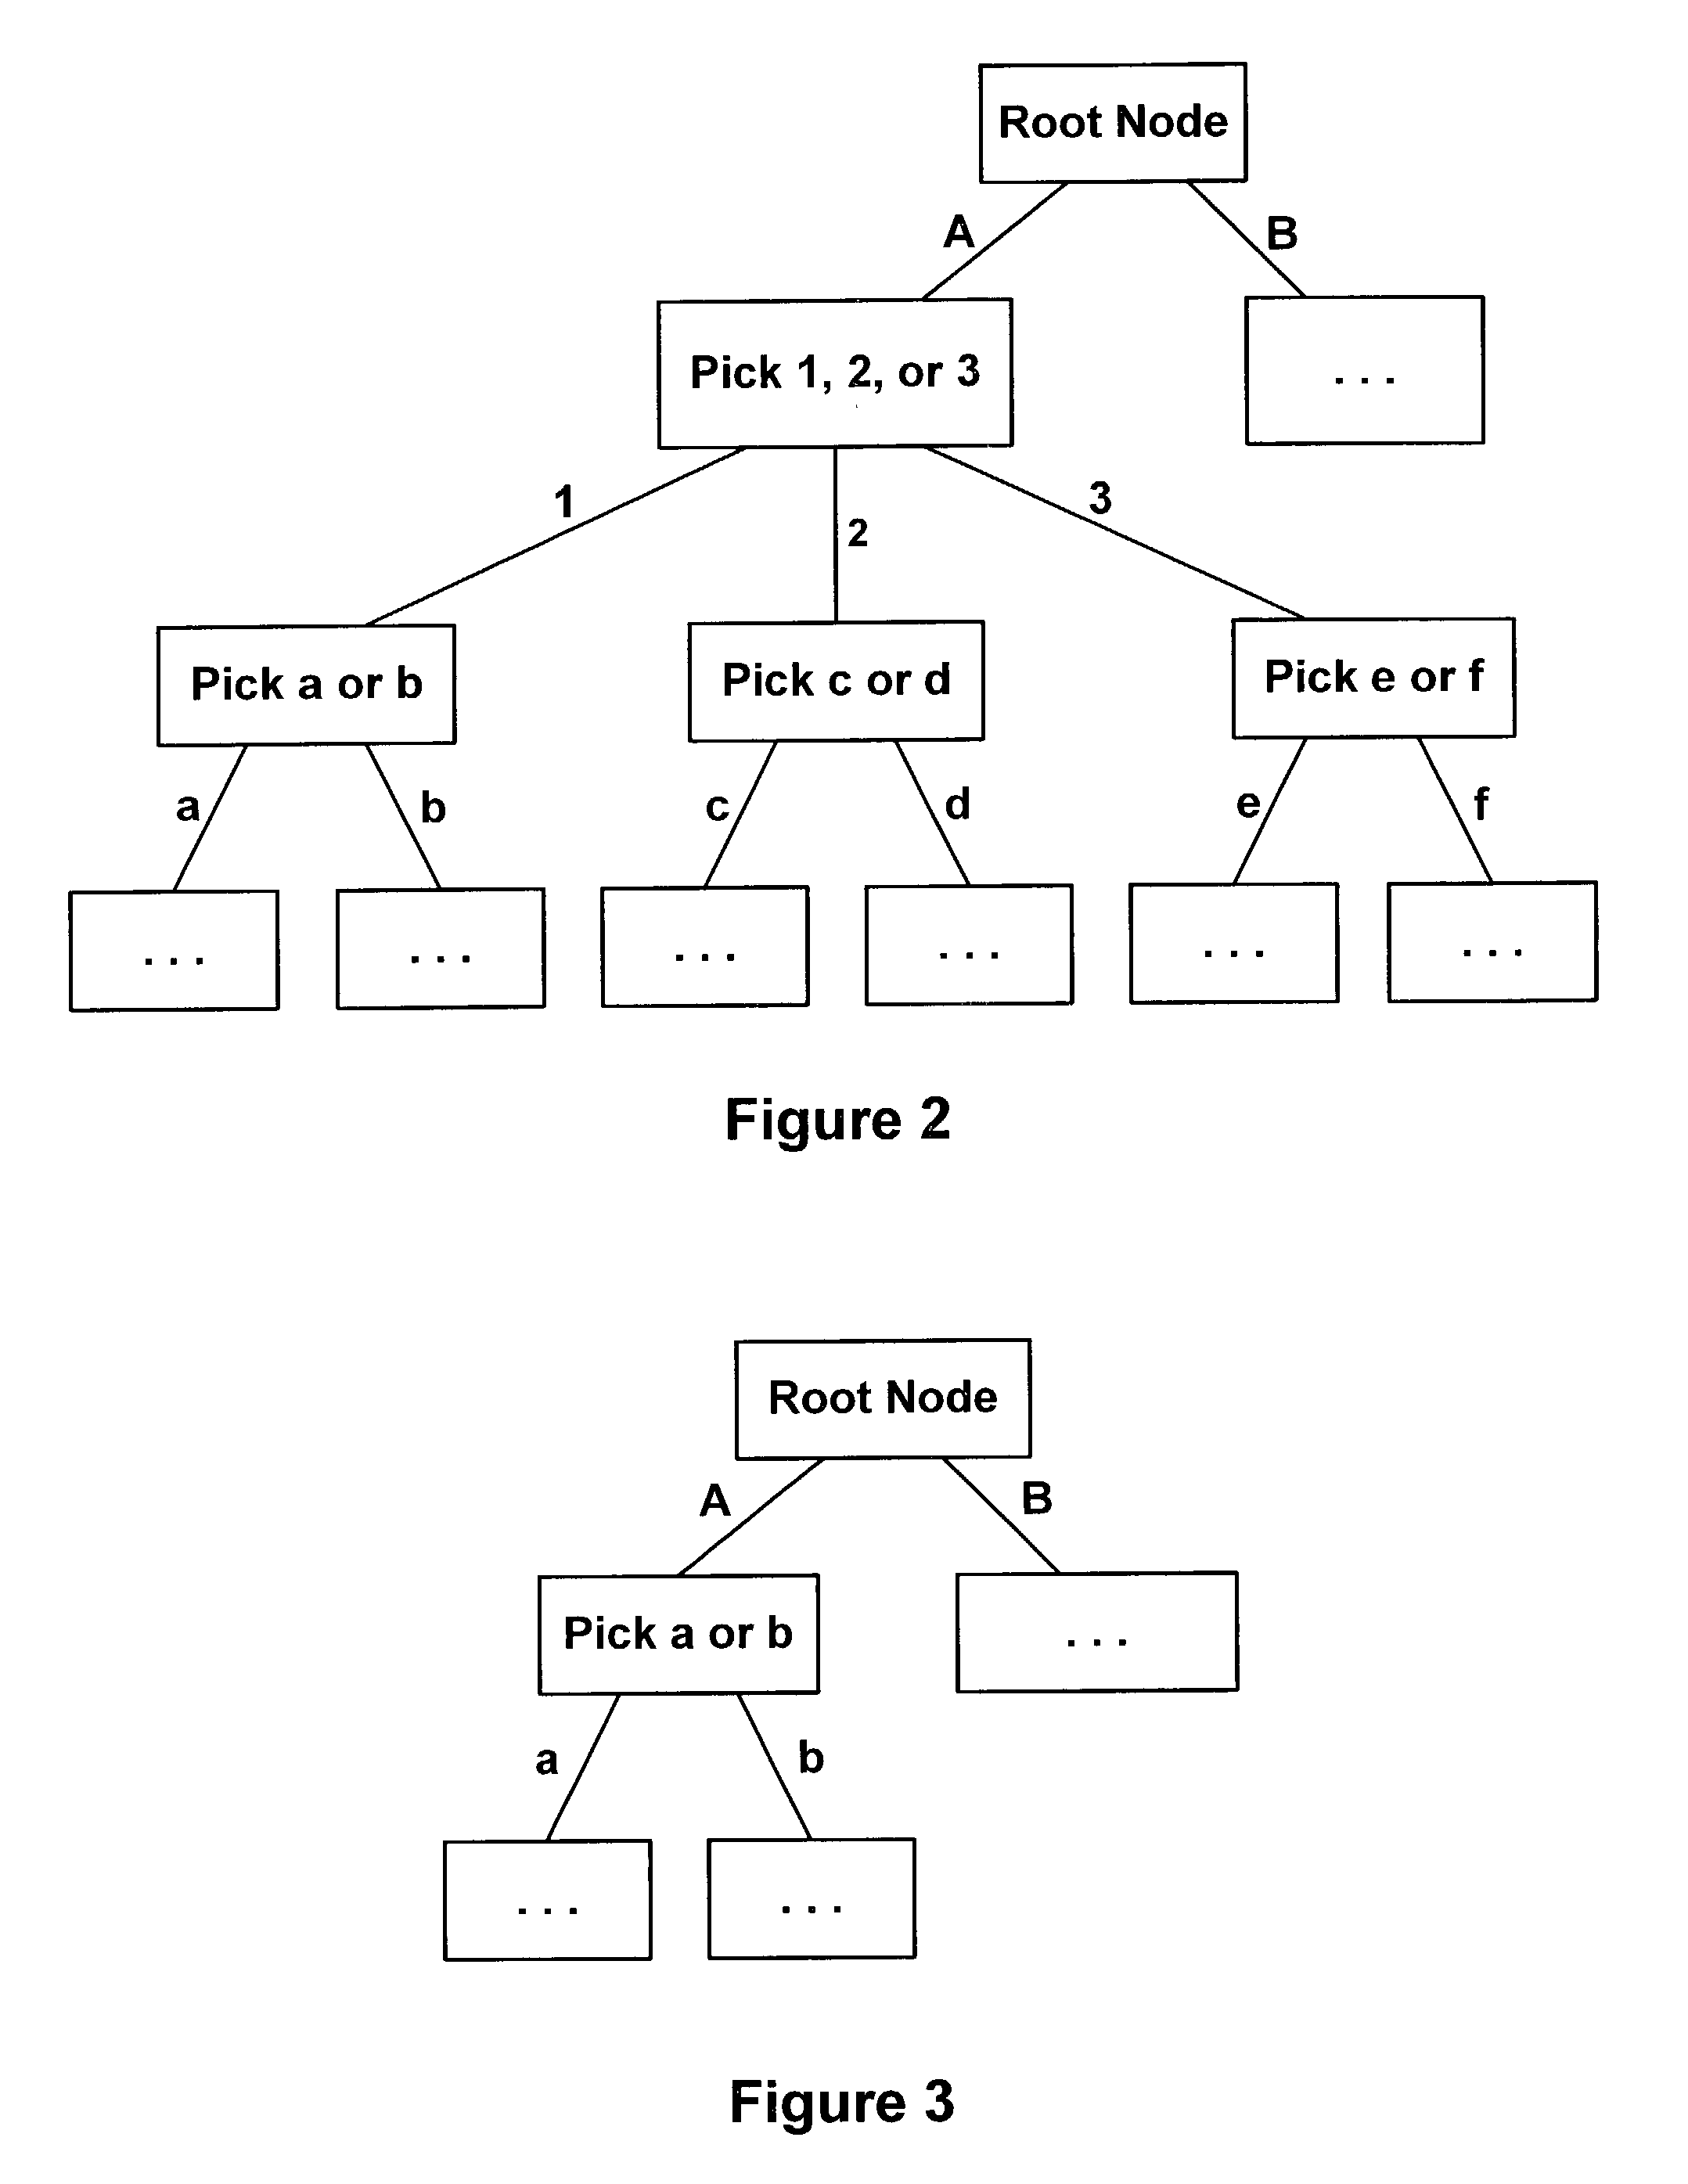 Method and system for dynamic variation of decision tree architecture